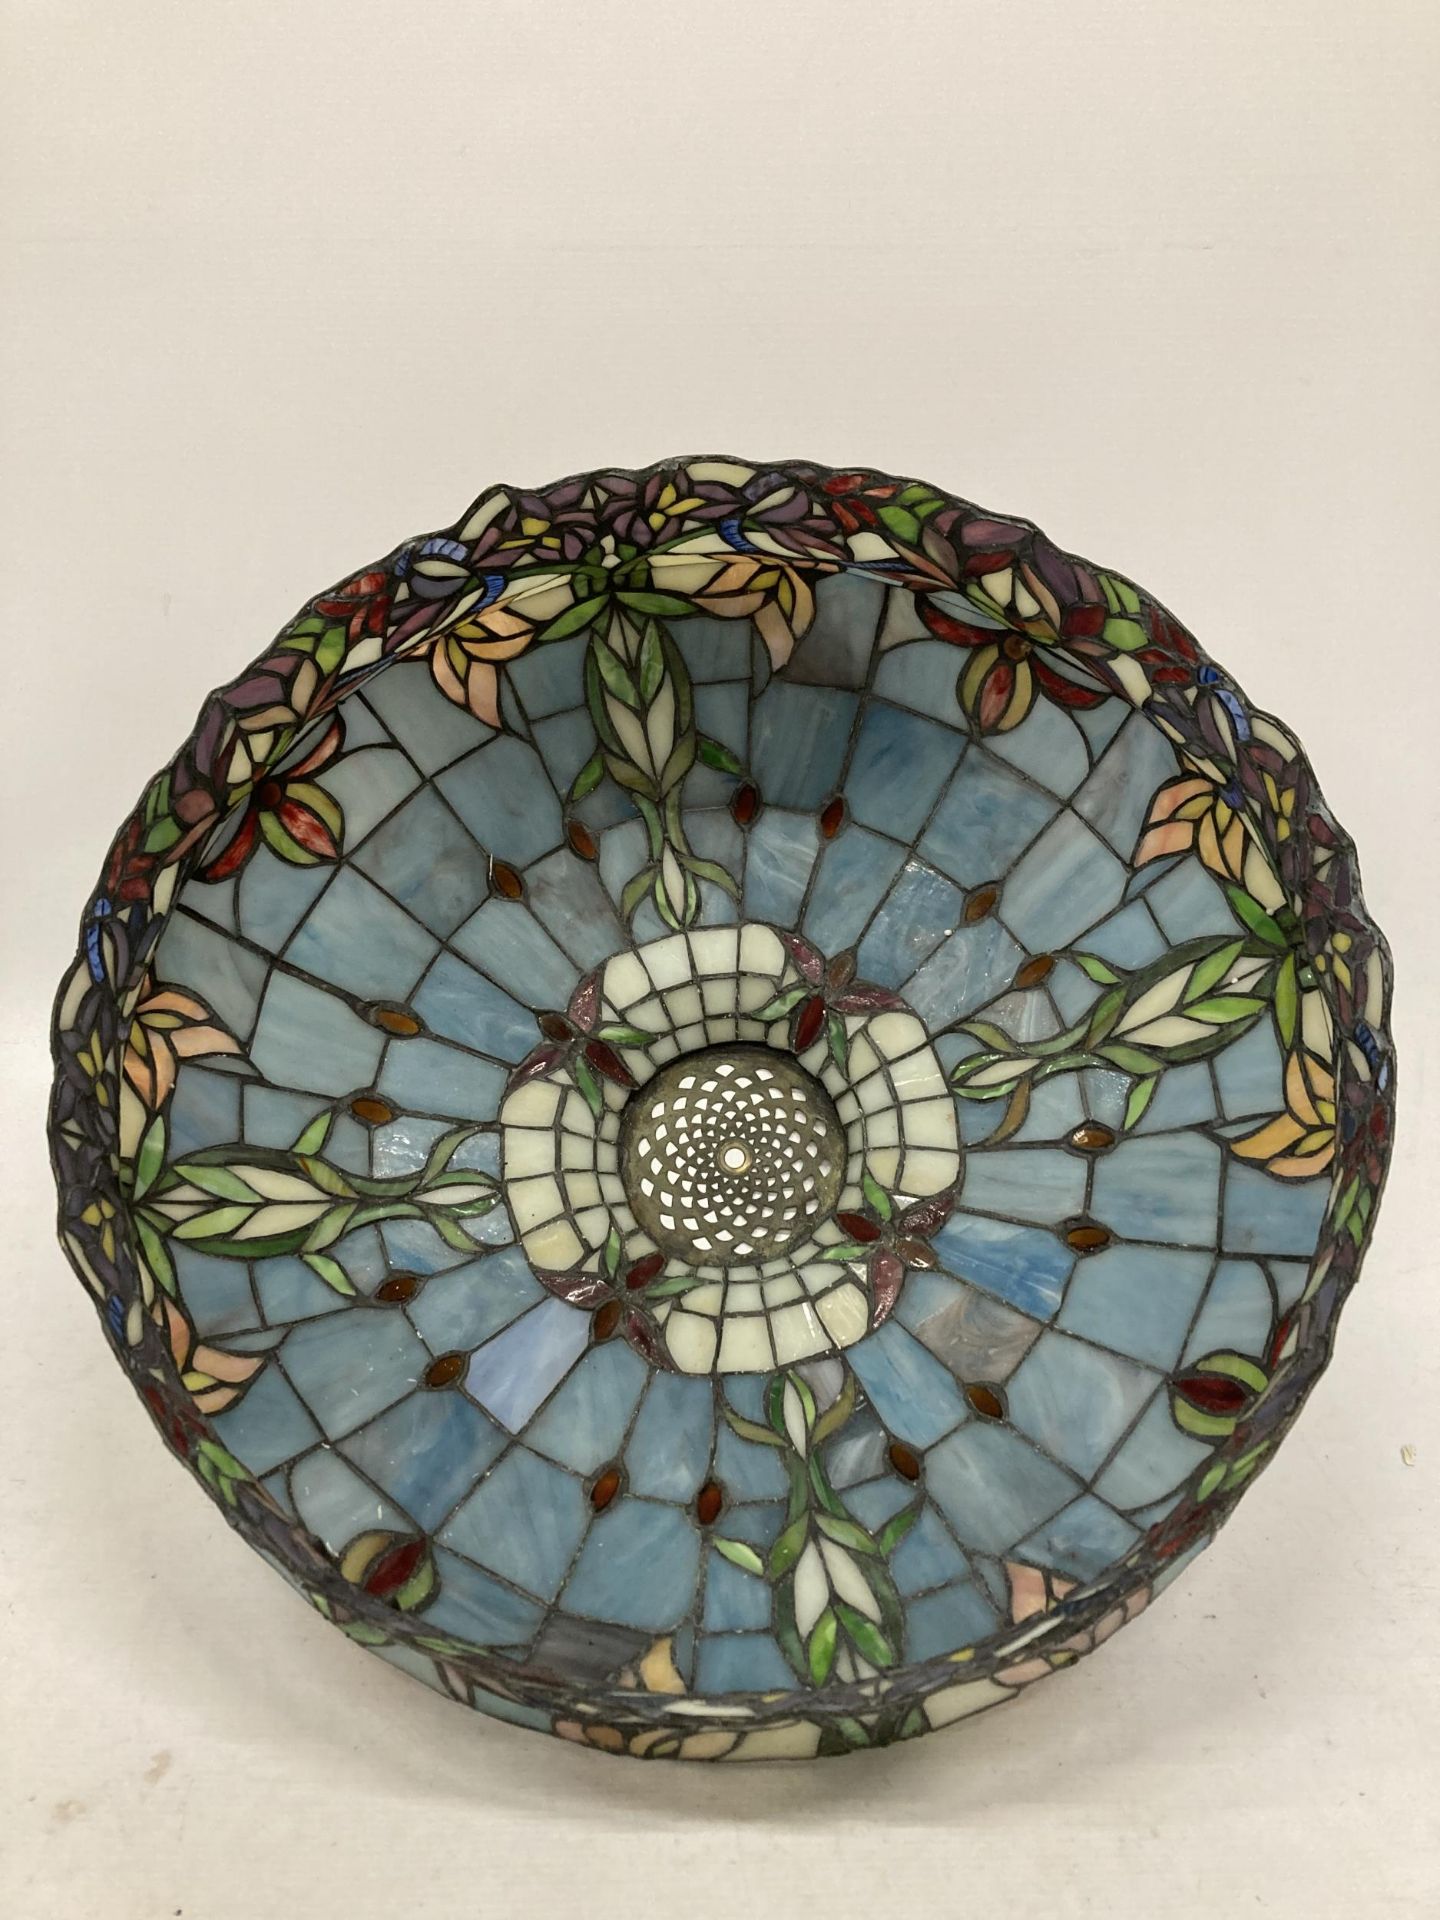 A VINTAGE TIFFANY STYLE LEADED GLASS CEILING LIGHT SHADE - Image 3 of 3